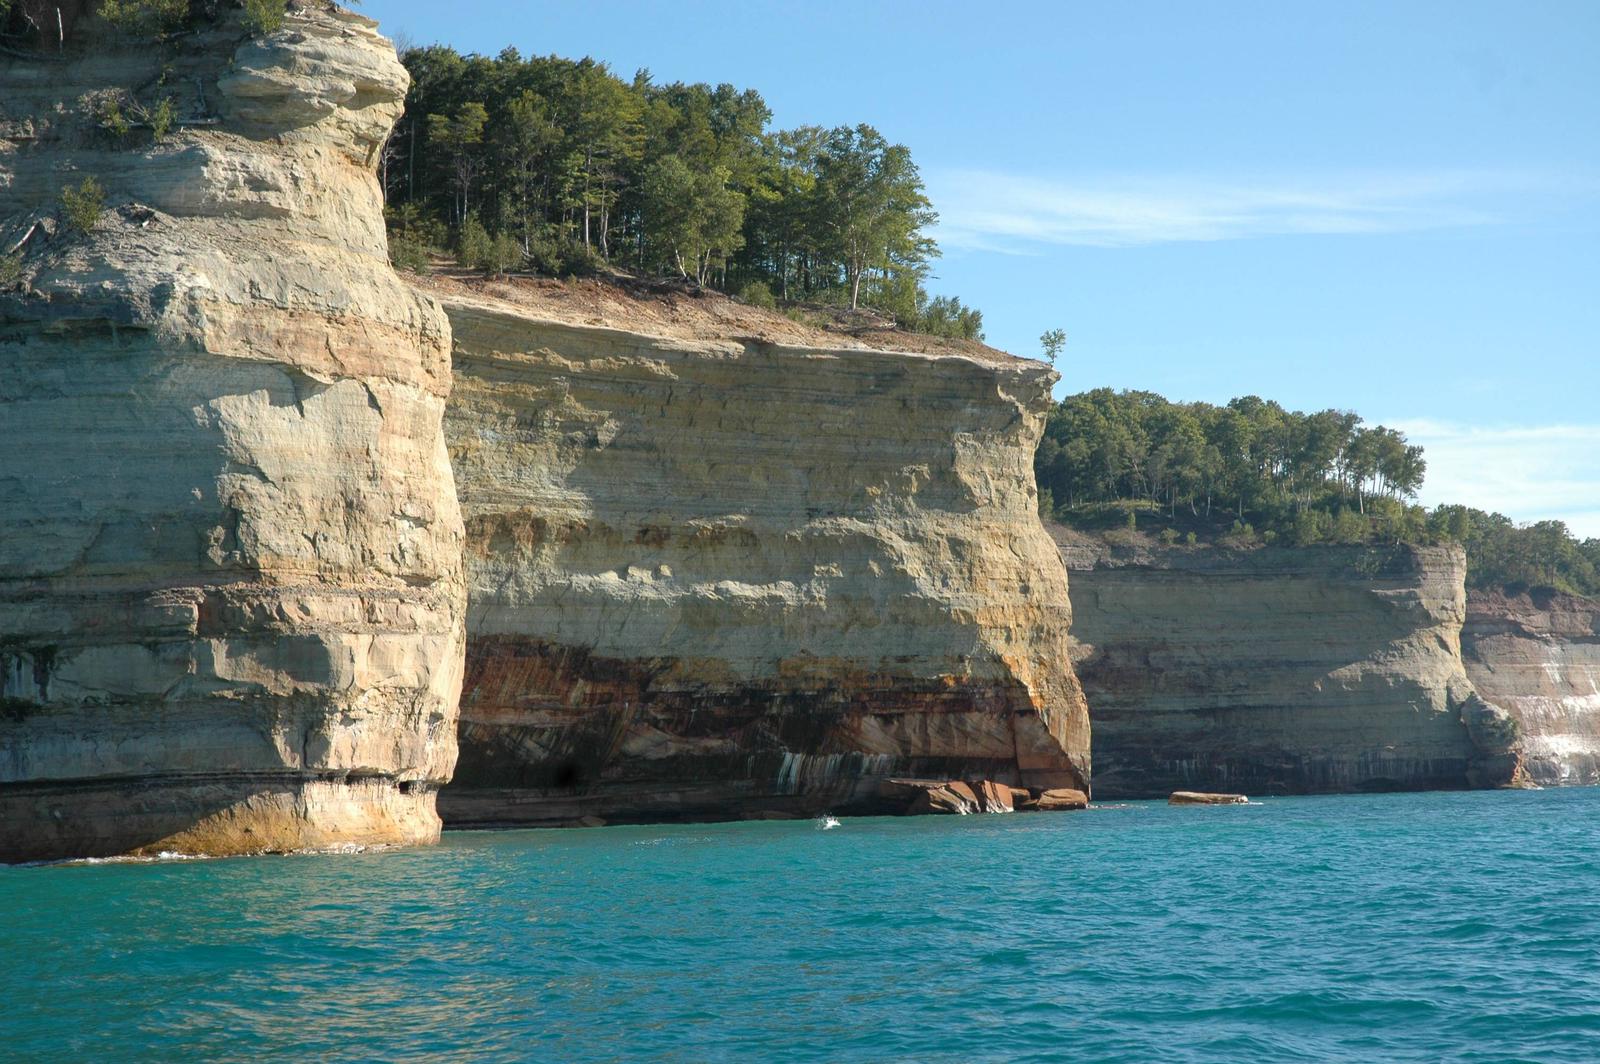 A water view of Pictured Rocks National LakeshorePhoto of Battle Ship Row rock formation